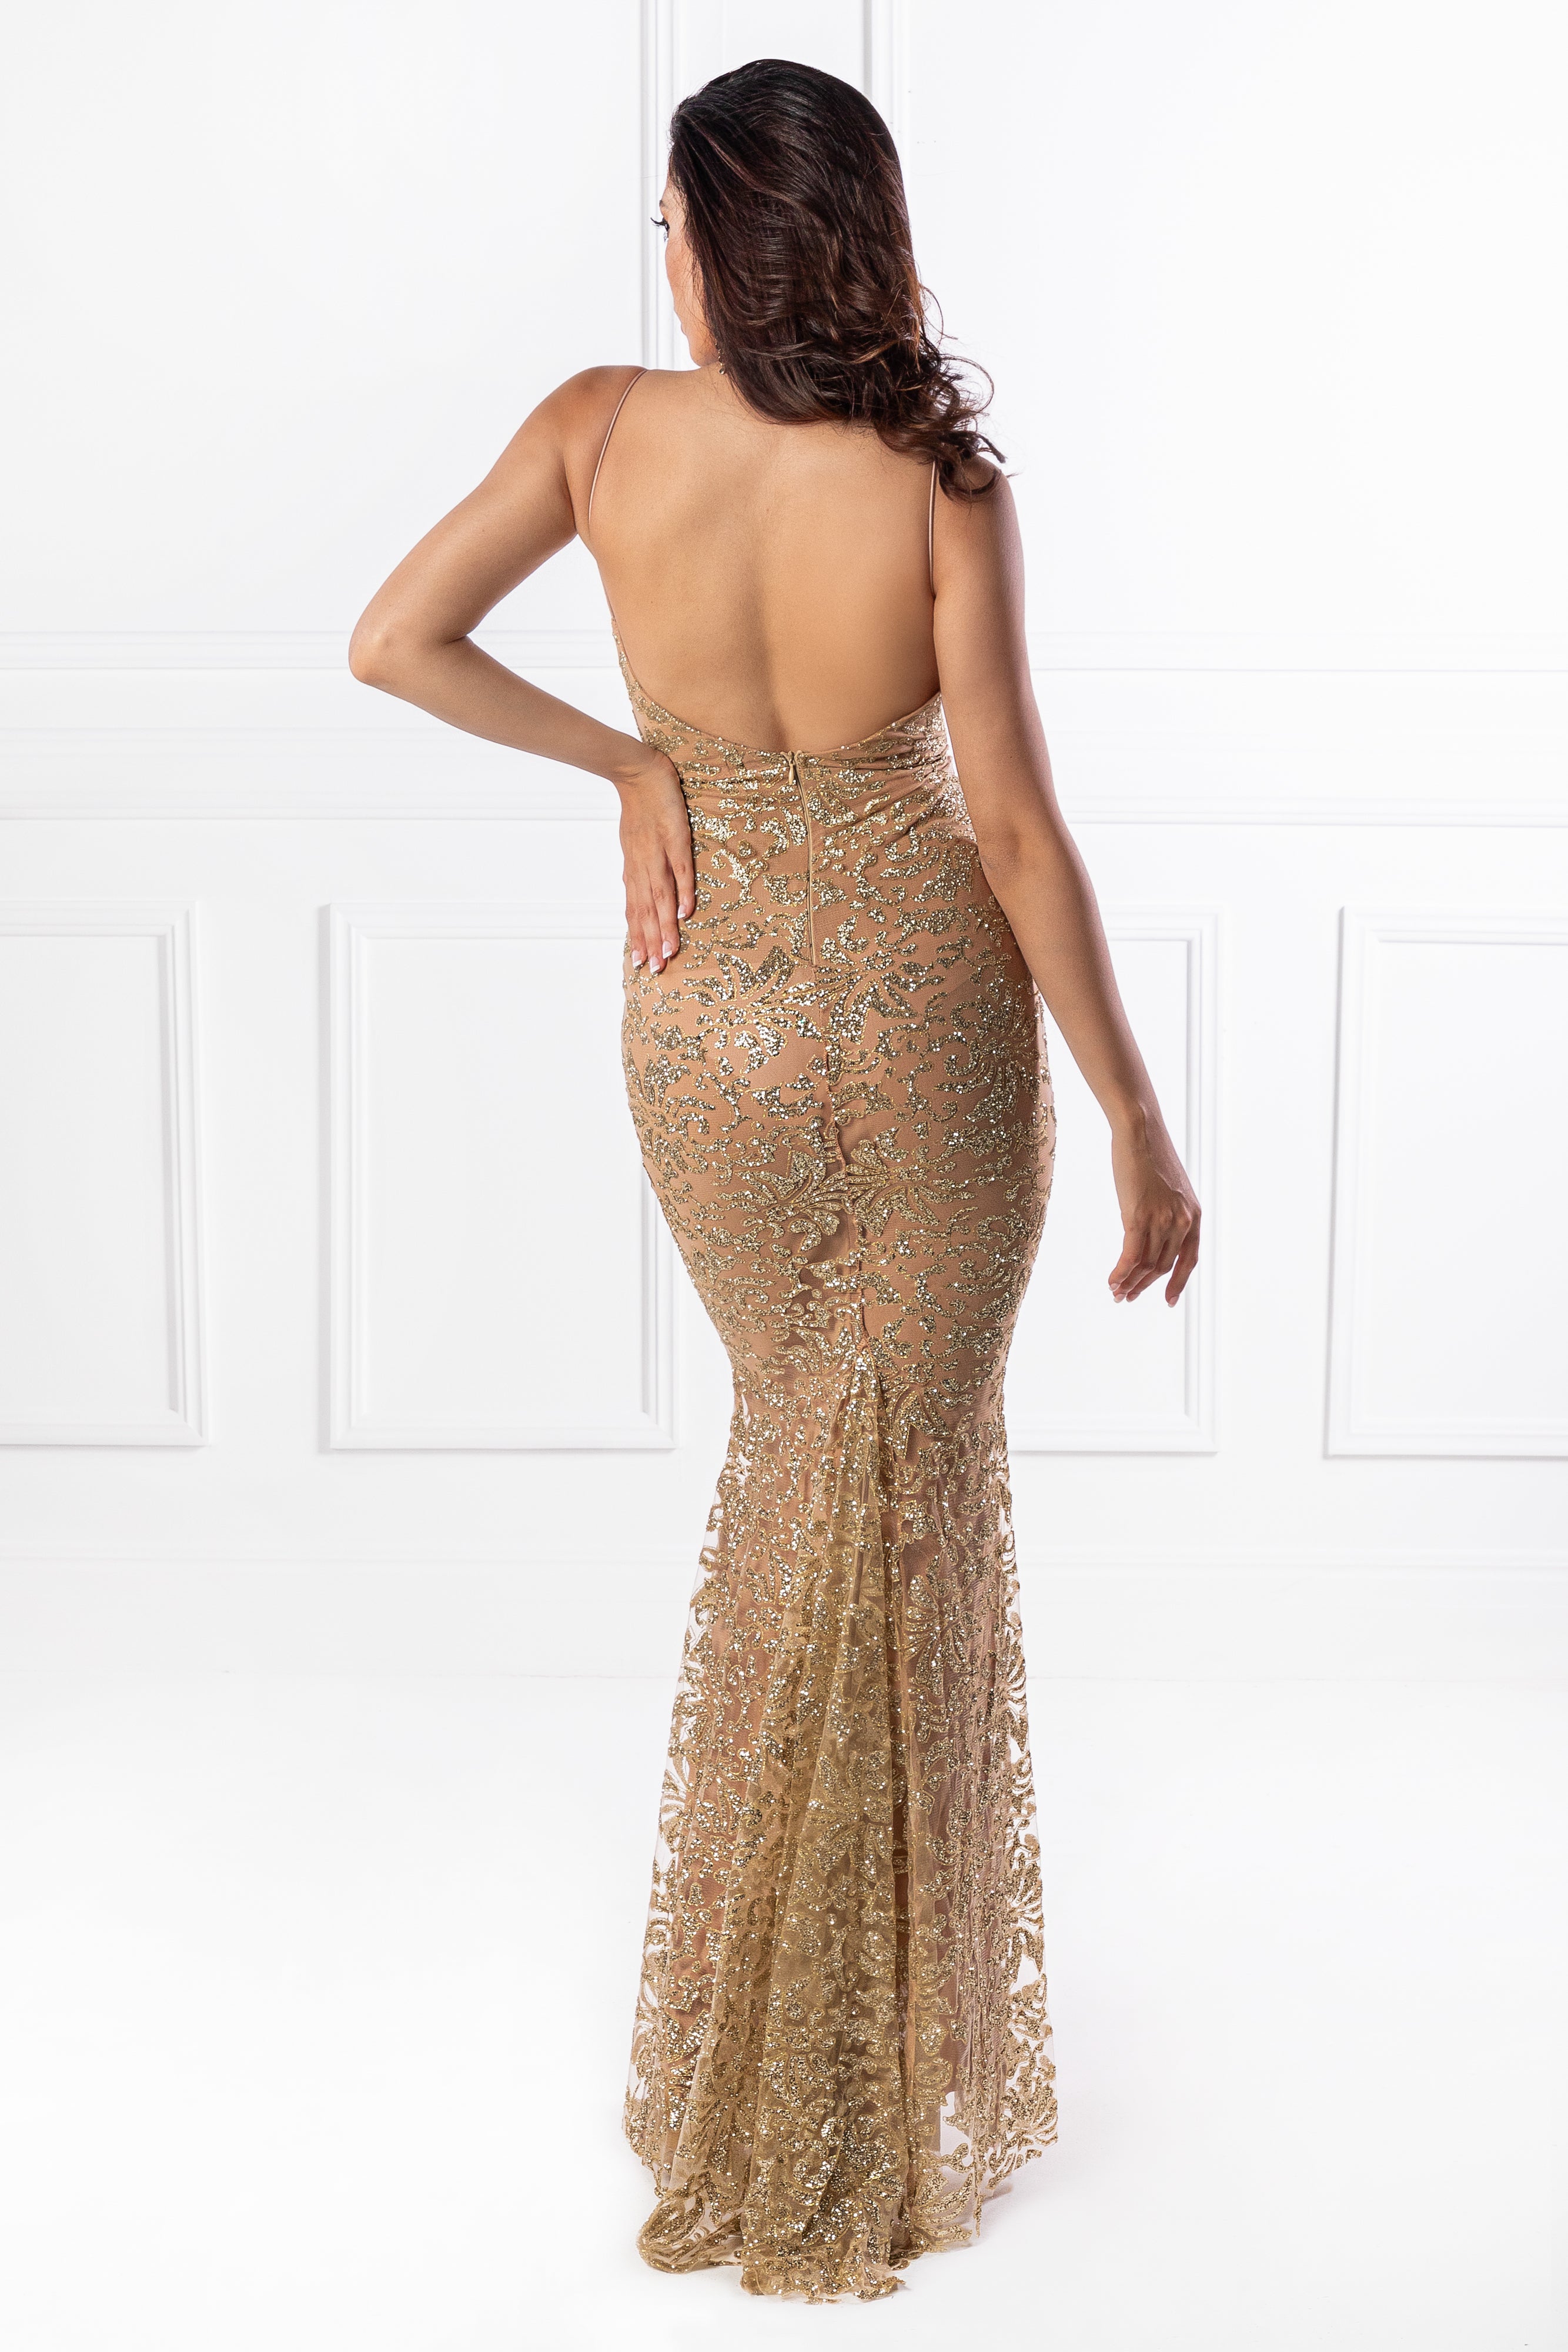 Honey Couture ETTA Gold Lace &amp; Glitter Overlay Mermaid Formal Gown Dress {vendor} AfterPay Humm ZipPay LayBuy Sezzle